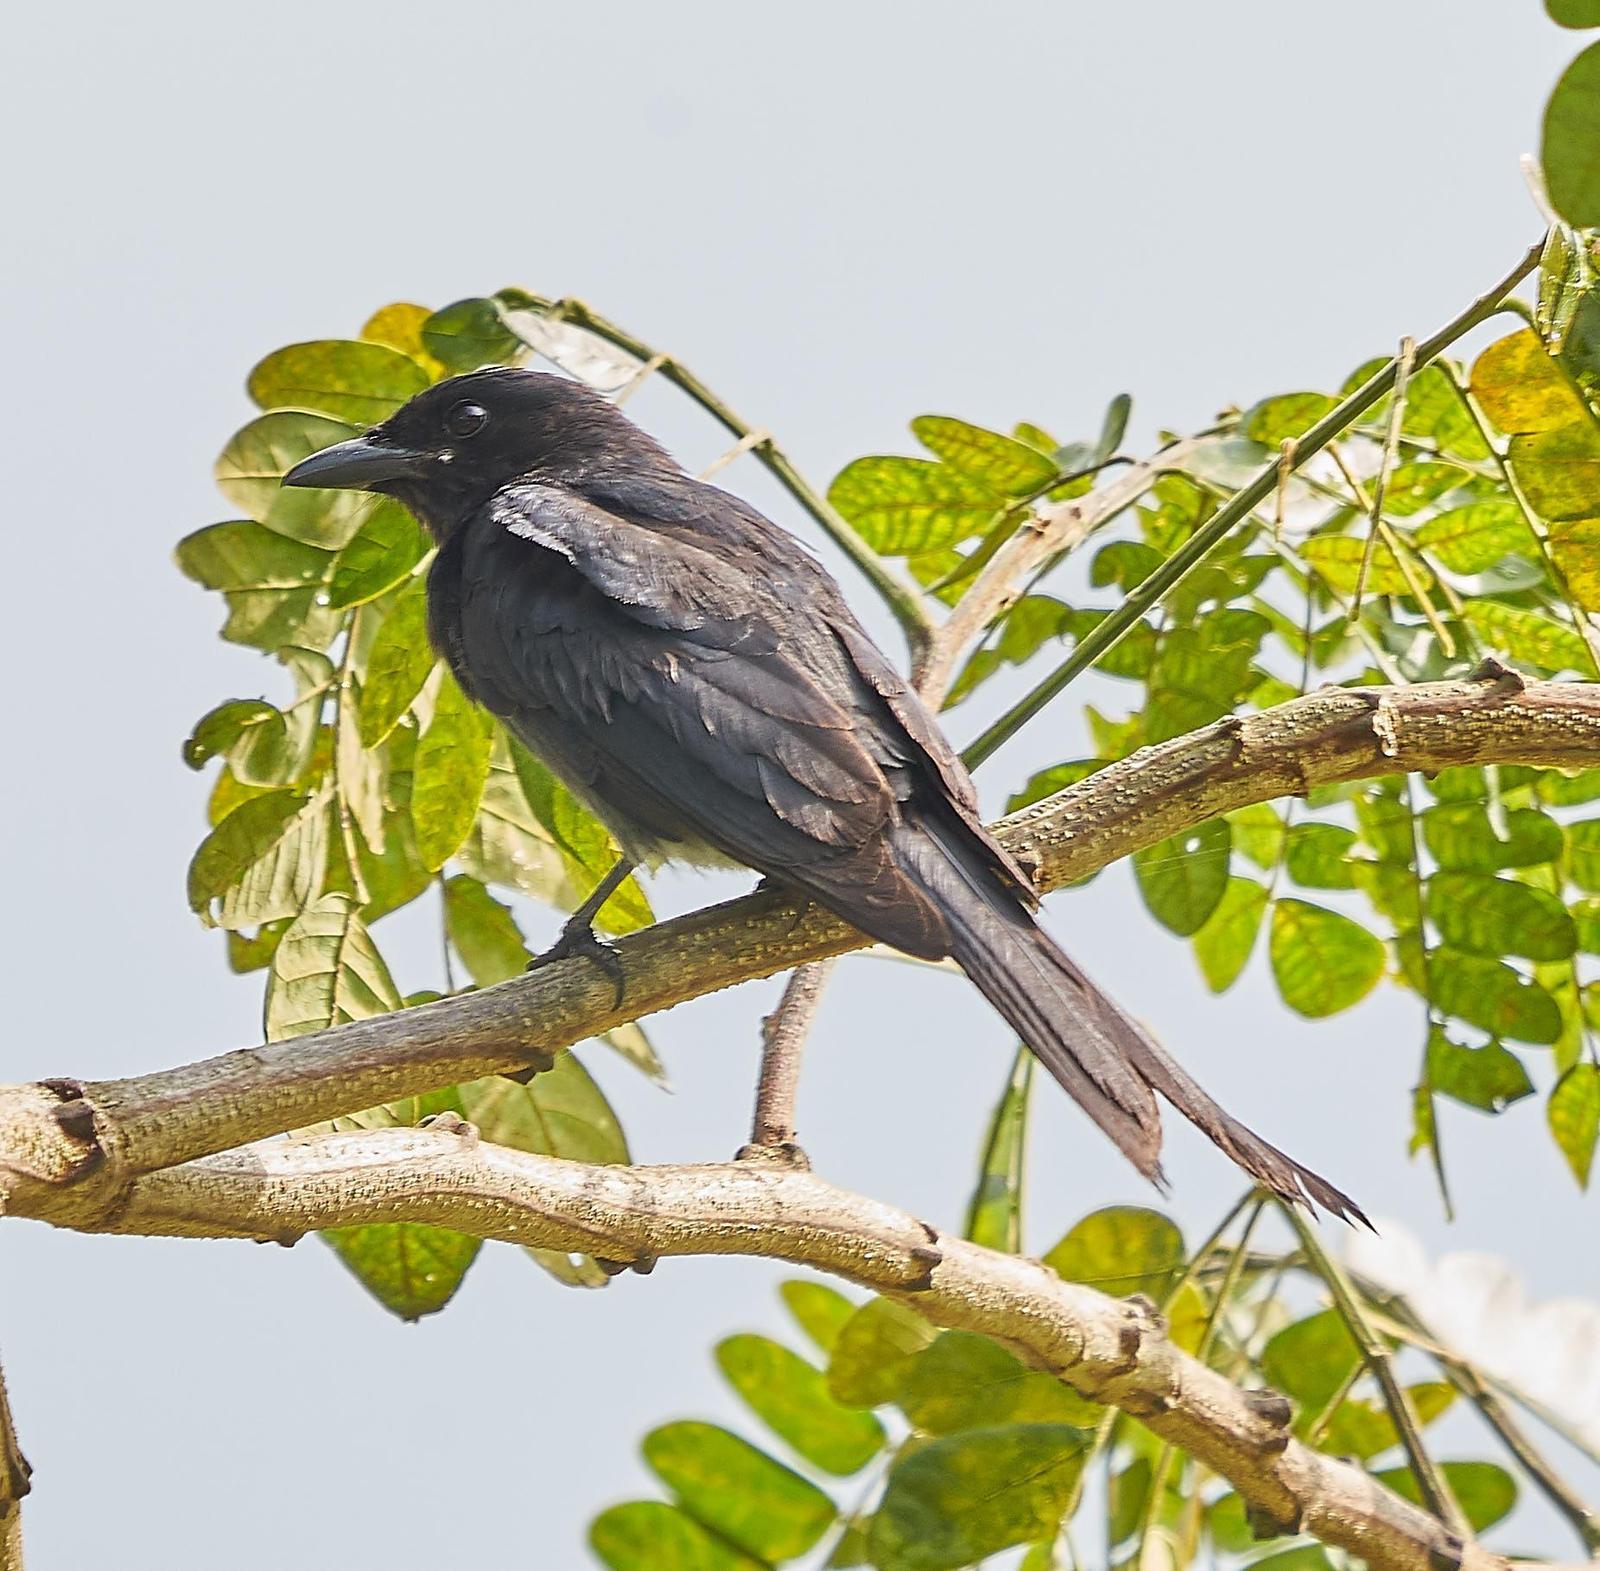 Black Drongo Photo by Steven Cheong